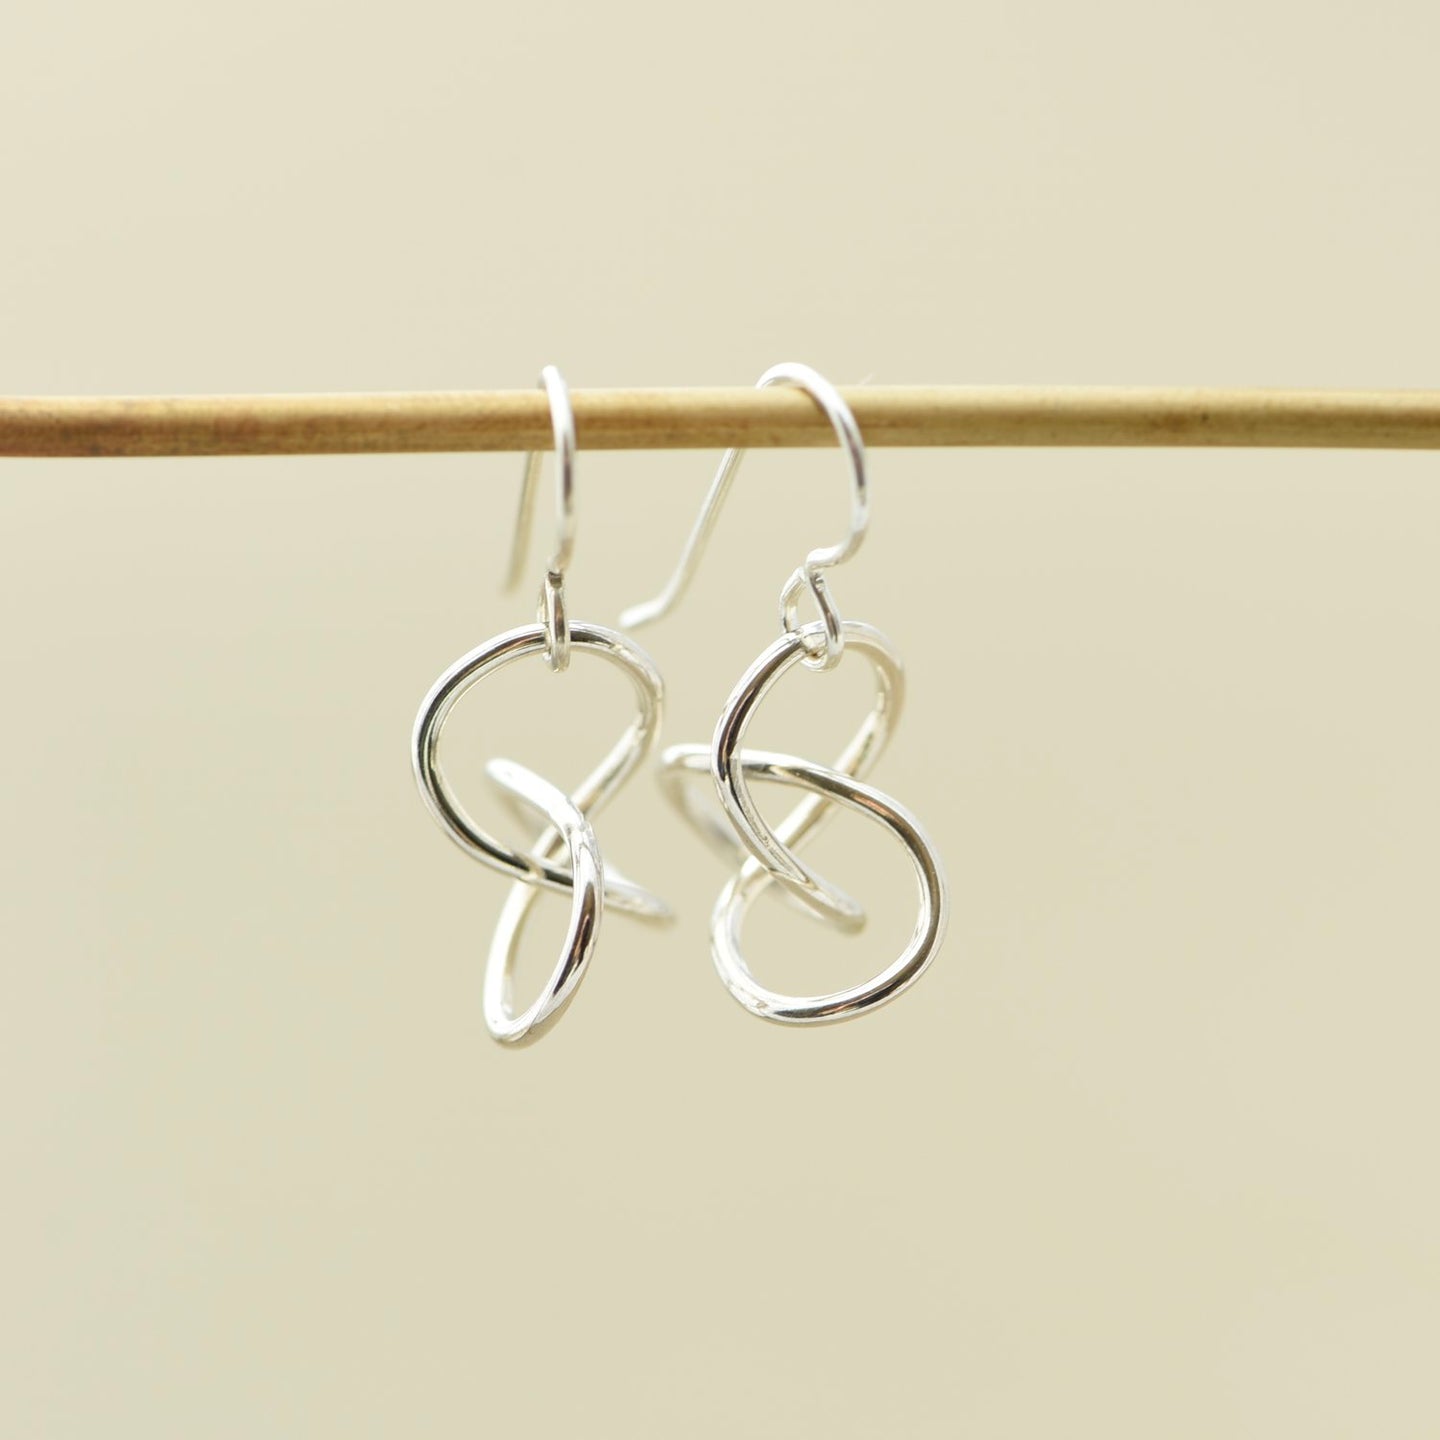 Continuous Knot Earrings